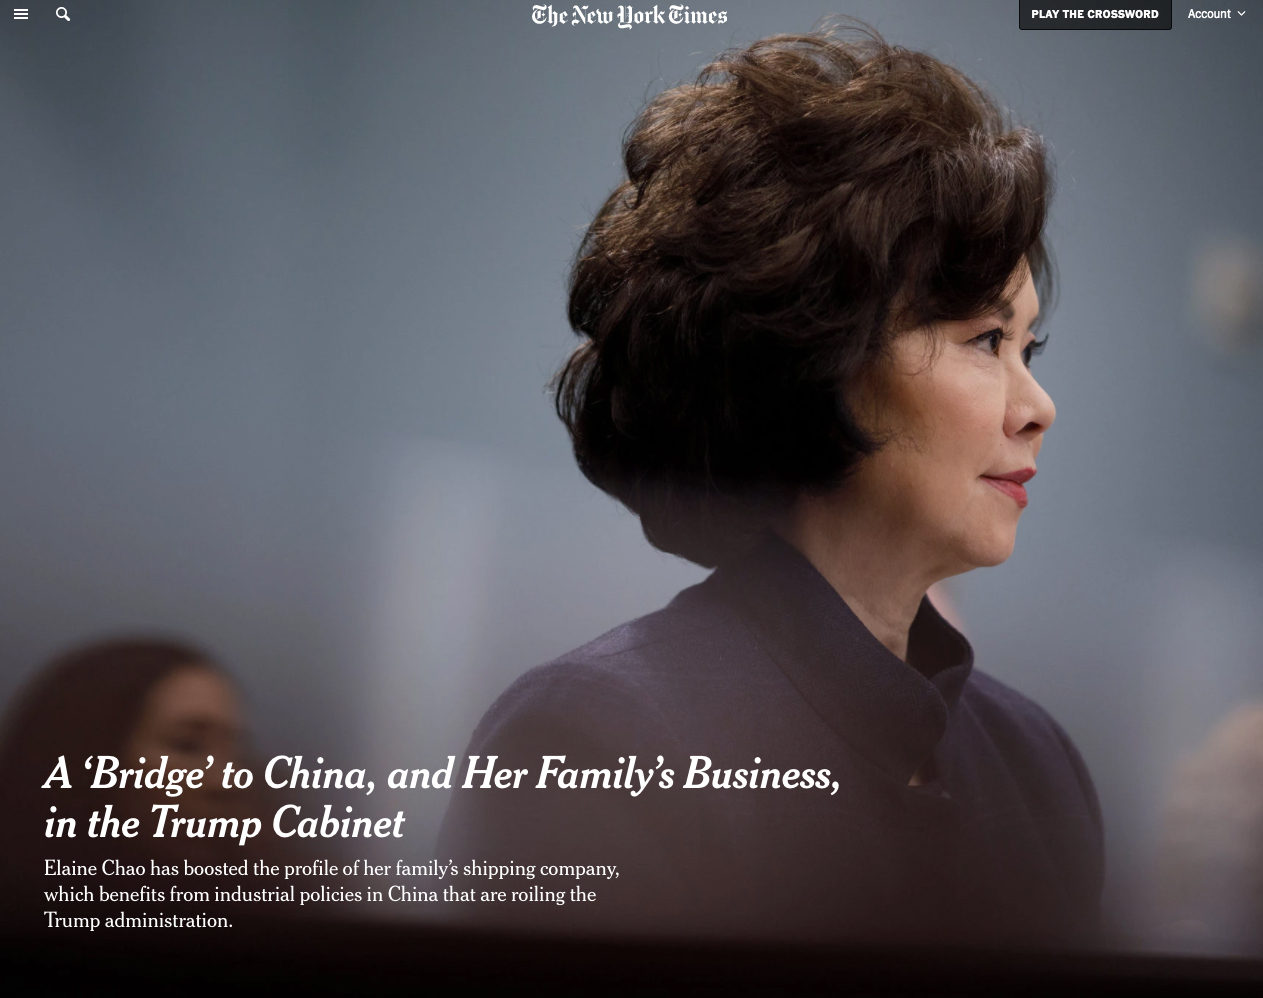 A ‘Bridge’ to China, and Her Family’s Business, in the Trump Cabinet